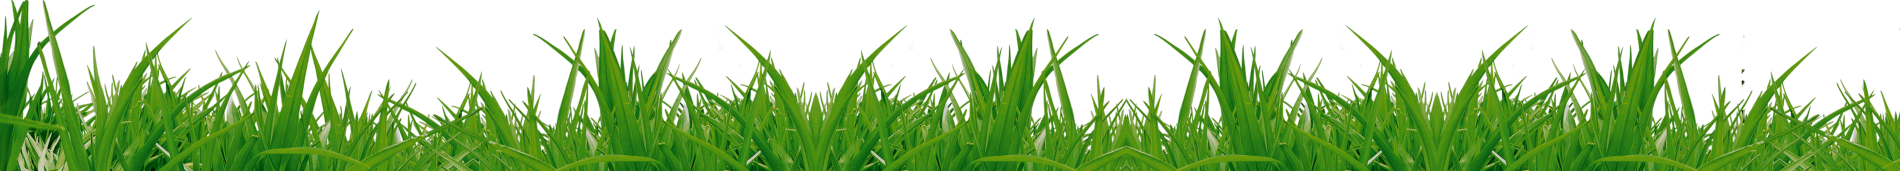 Download PNG image - Lawn Background Isolated PNG 